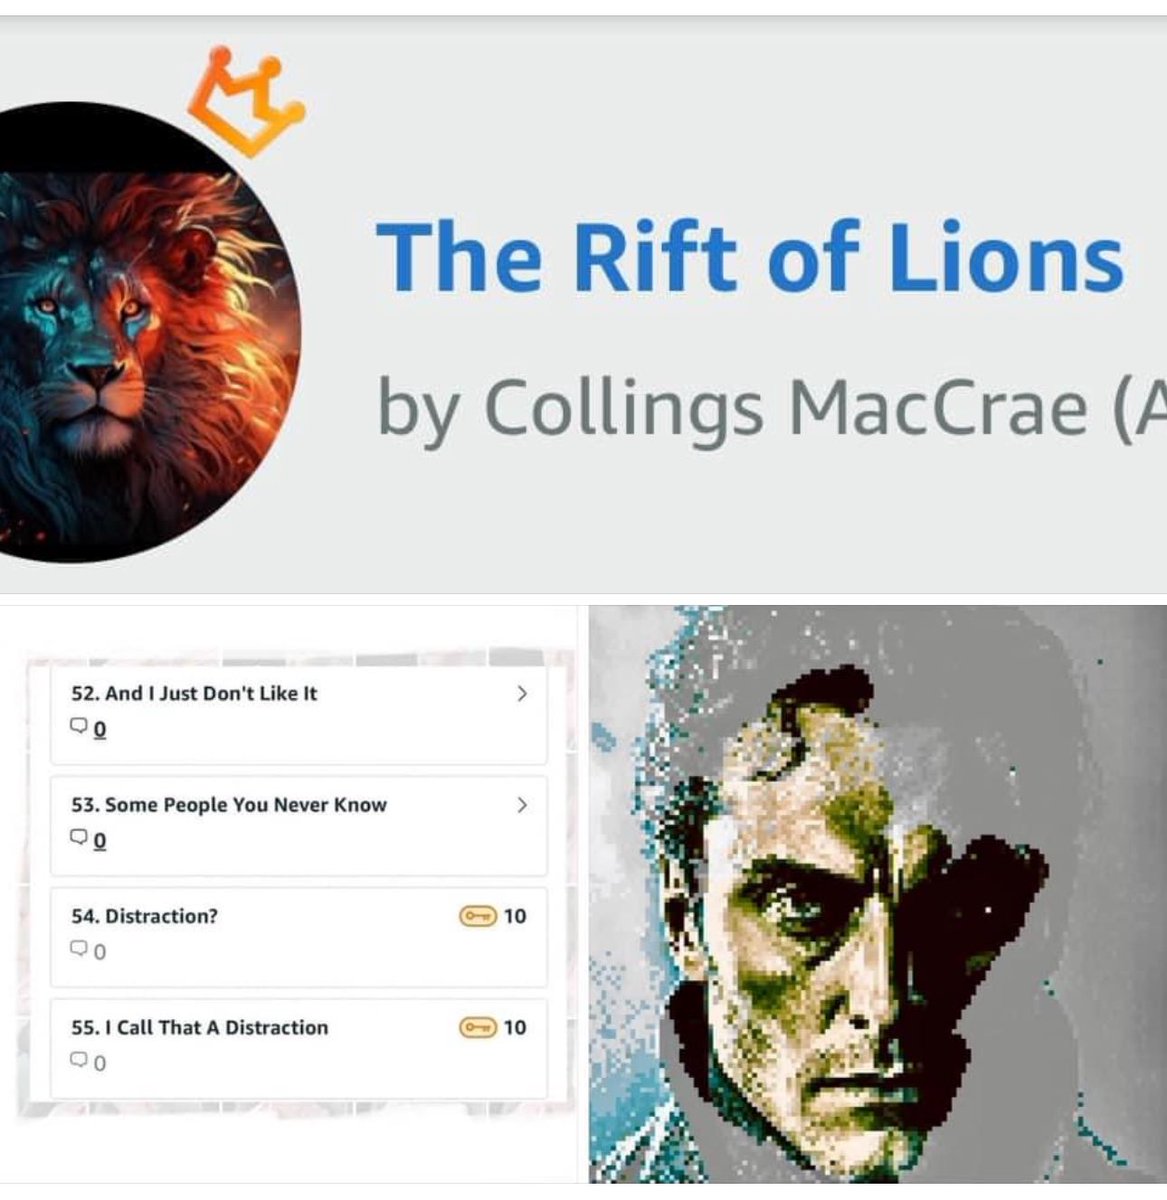 The Rift of Lions #foxargallmysteries 
Book 8 #collingsmaccrae
#thrillerbooks #5amwritersclub #mysteryseries 
amazon.com/kindle-vella/d…